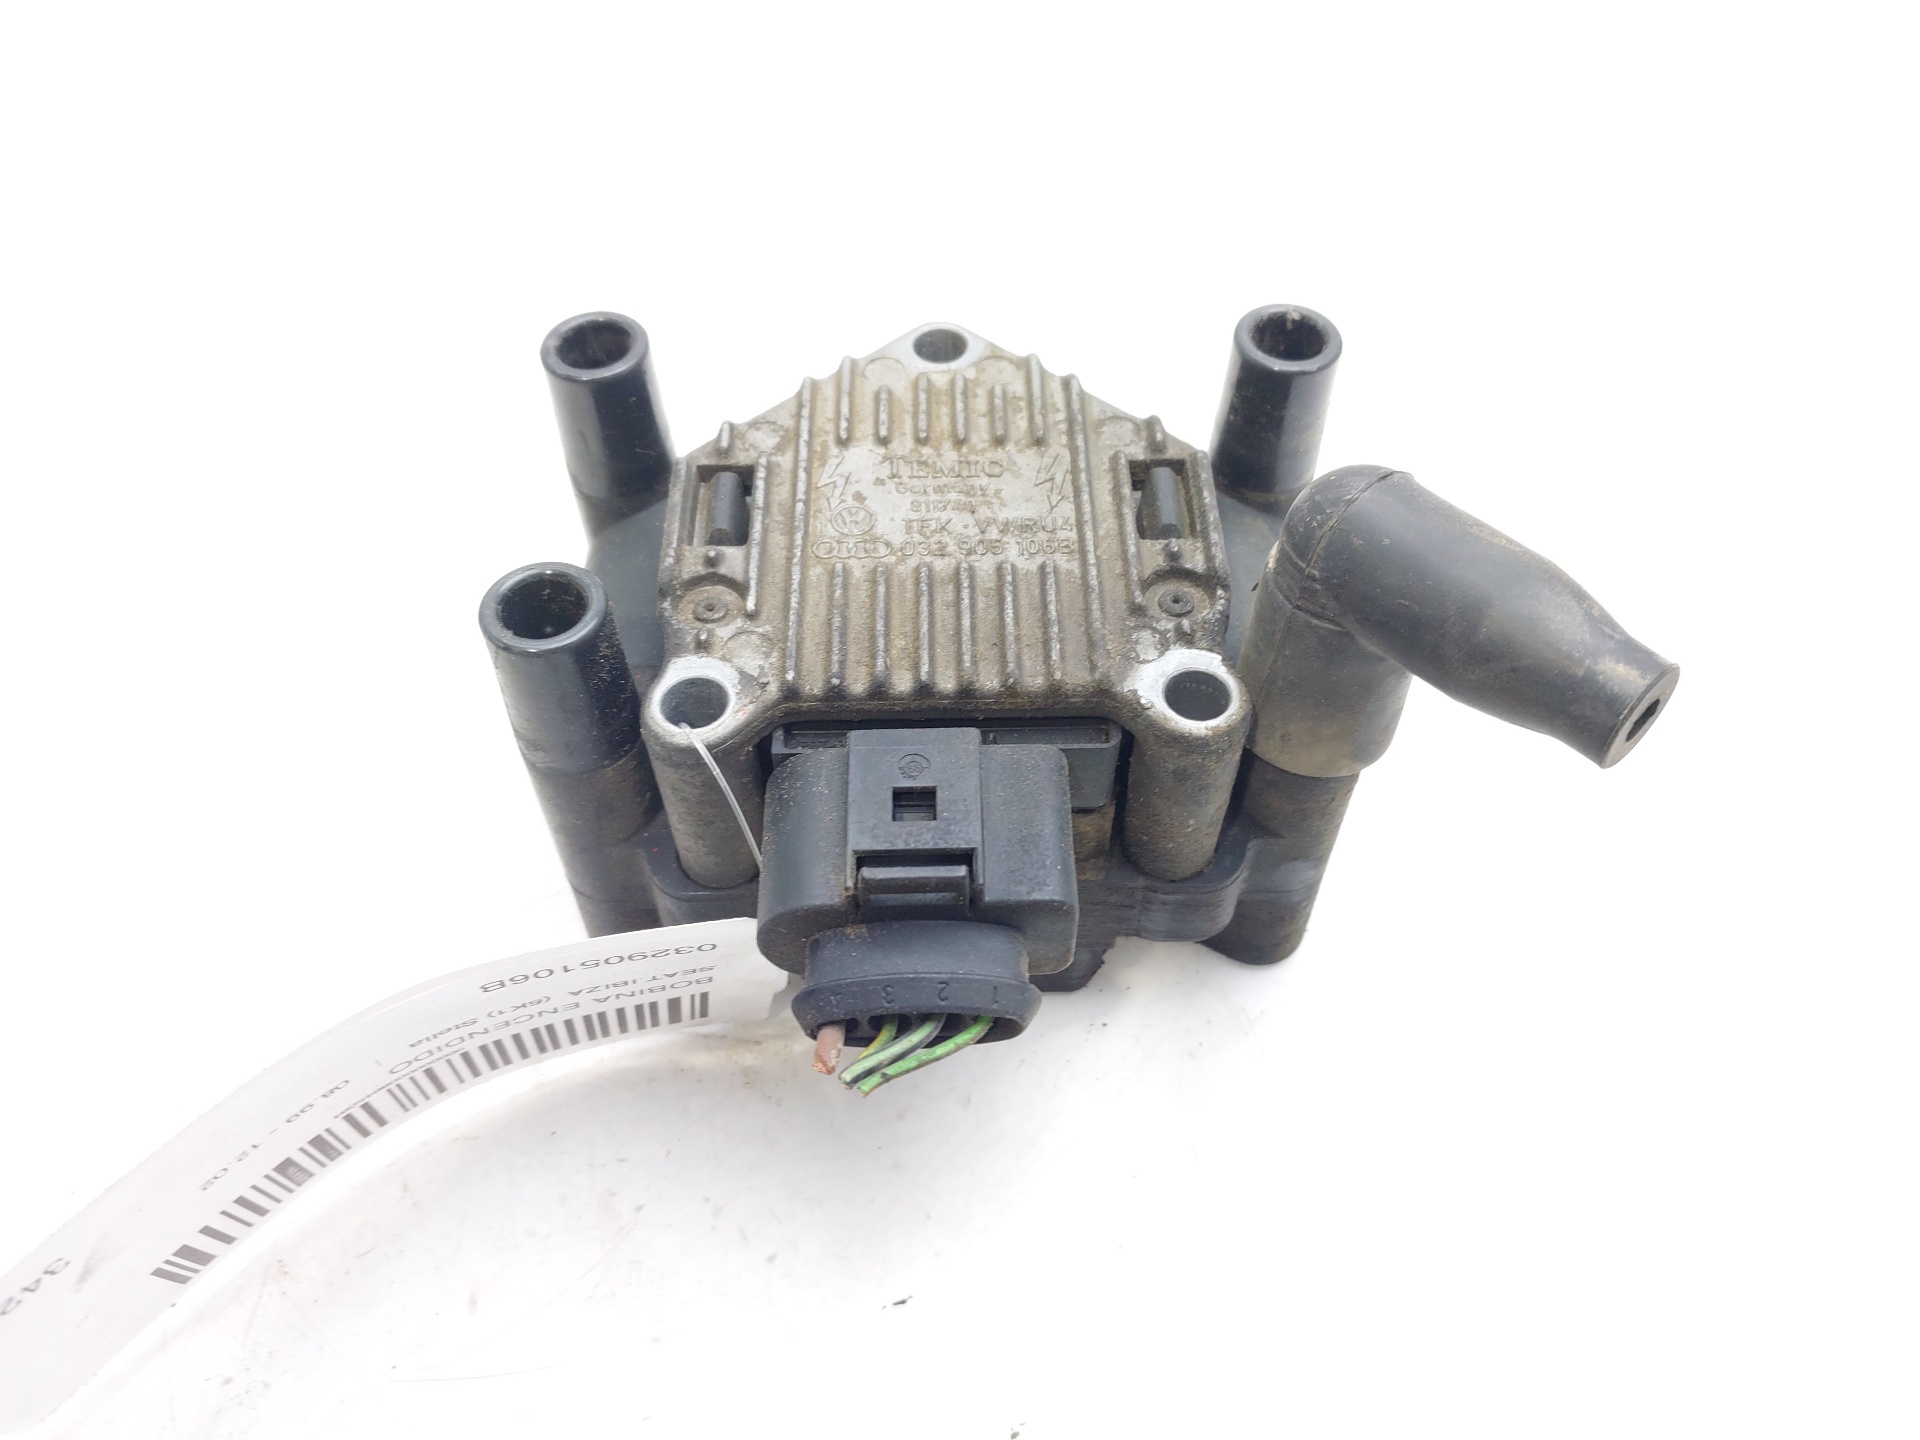 SEAT Ibiza 2 generation (1993-2002) High Voltage Ignition Coil 032905106B 24260254